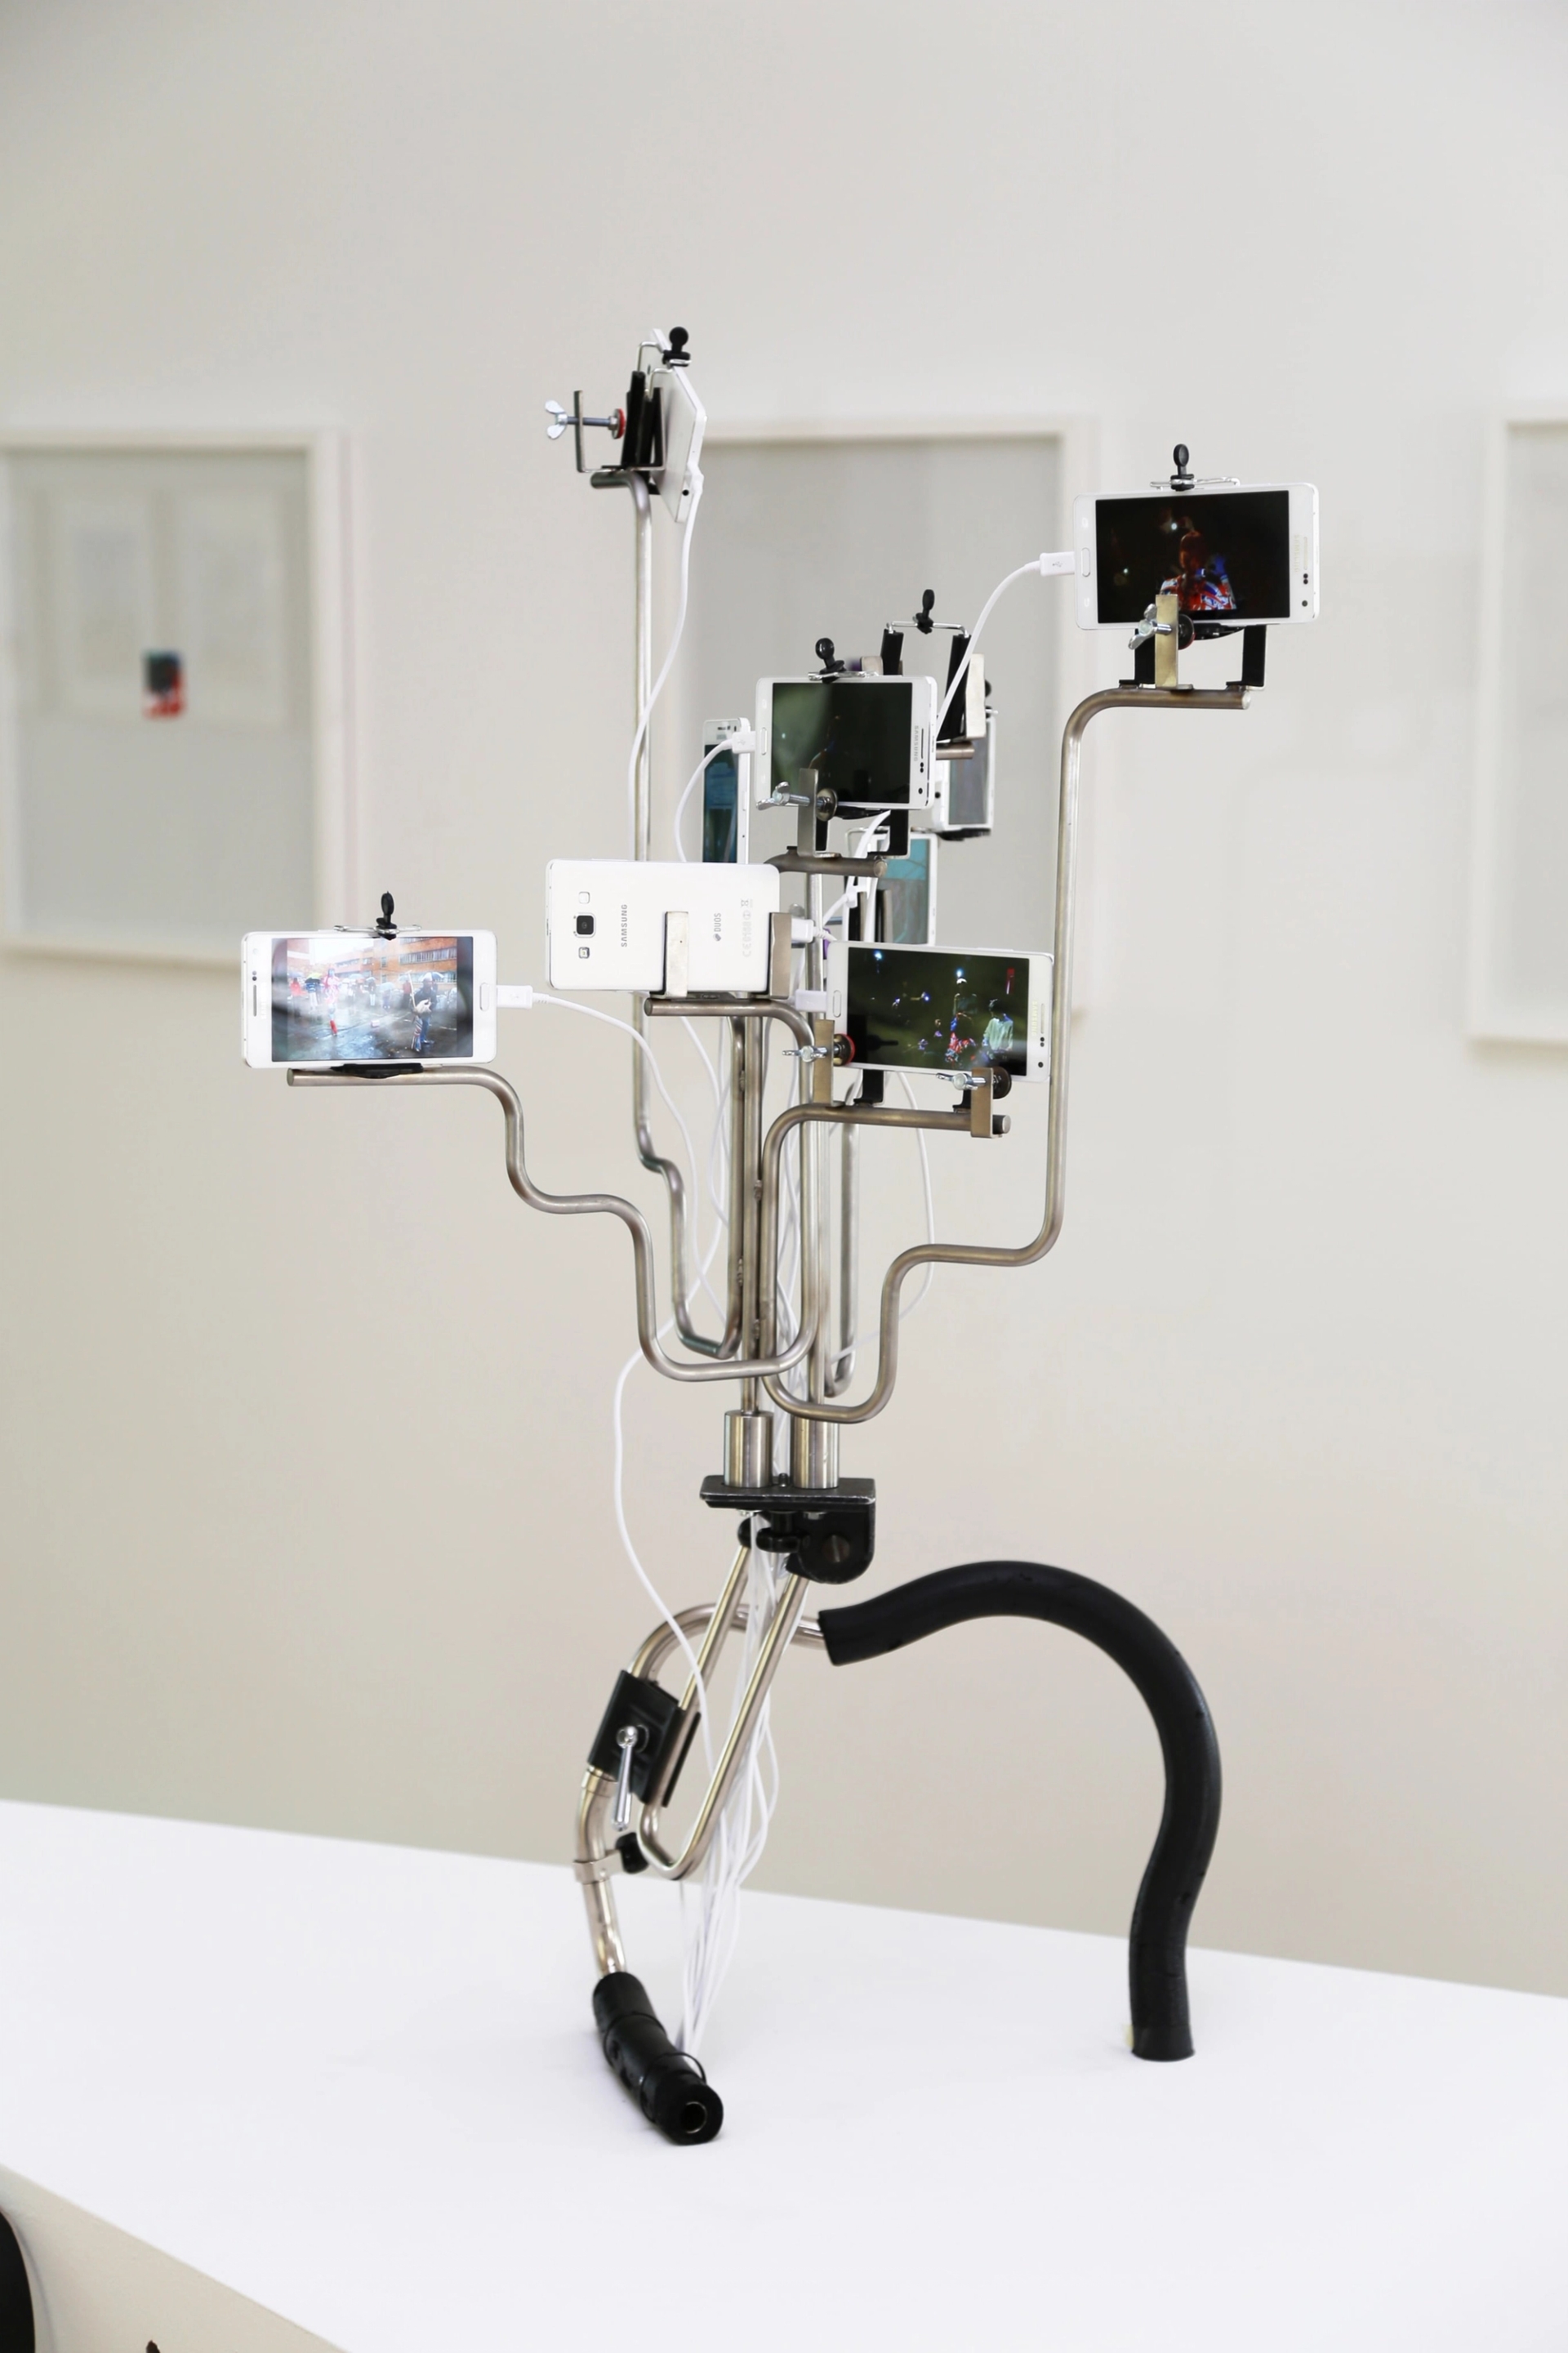 The smartphone as prosthesis, materializing the political economy. Museum Angewandte Kunst, Frankfurt am Main (2015).